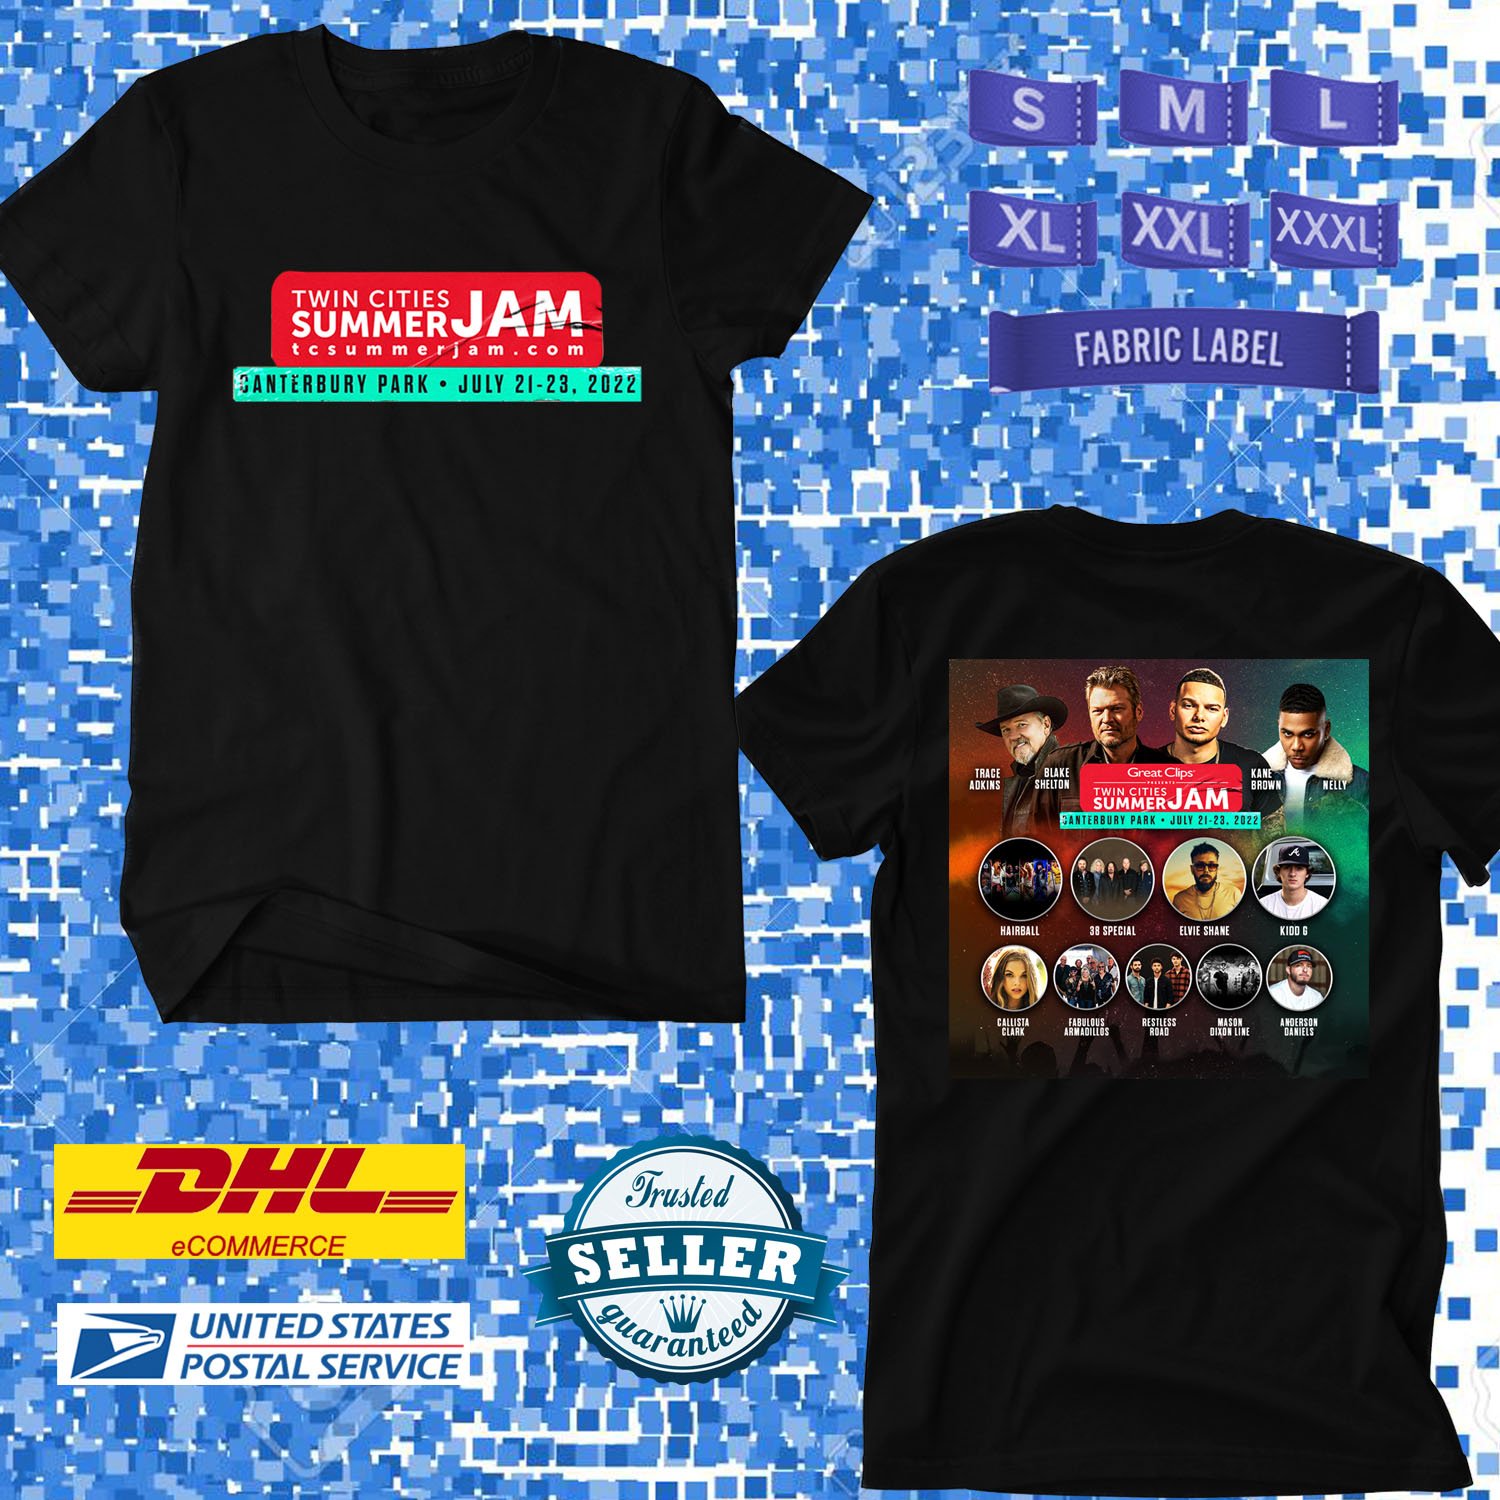 TOUR 2022 TWIN CITIES SUMMER JAM MUSIC FESTIVAL BLACK TEE SHIRT WITH